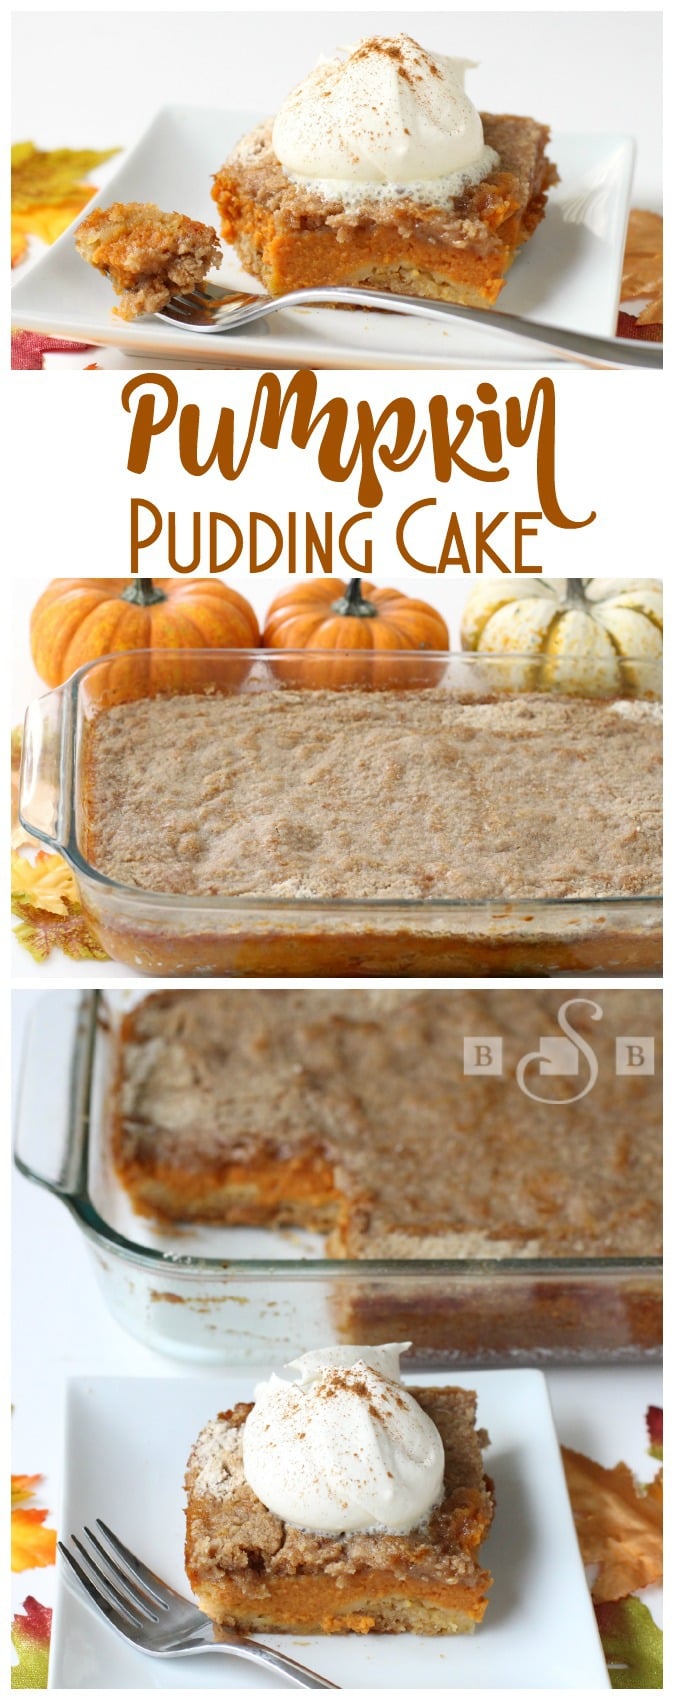 Pumpkin Pudding Cake is made with cake mix, pumpkin pie filling, butter, and cinnamon. It's a perfect, delicious alternative for Pumpkin Pie!